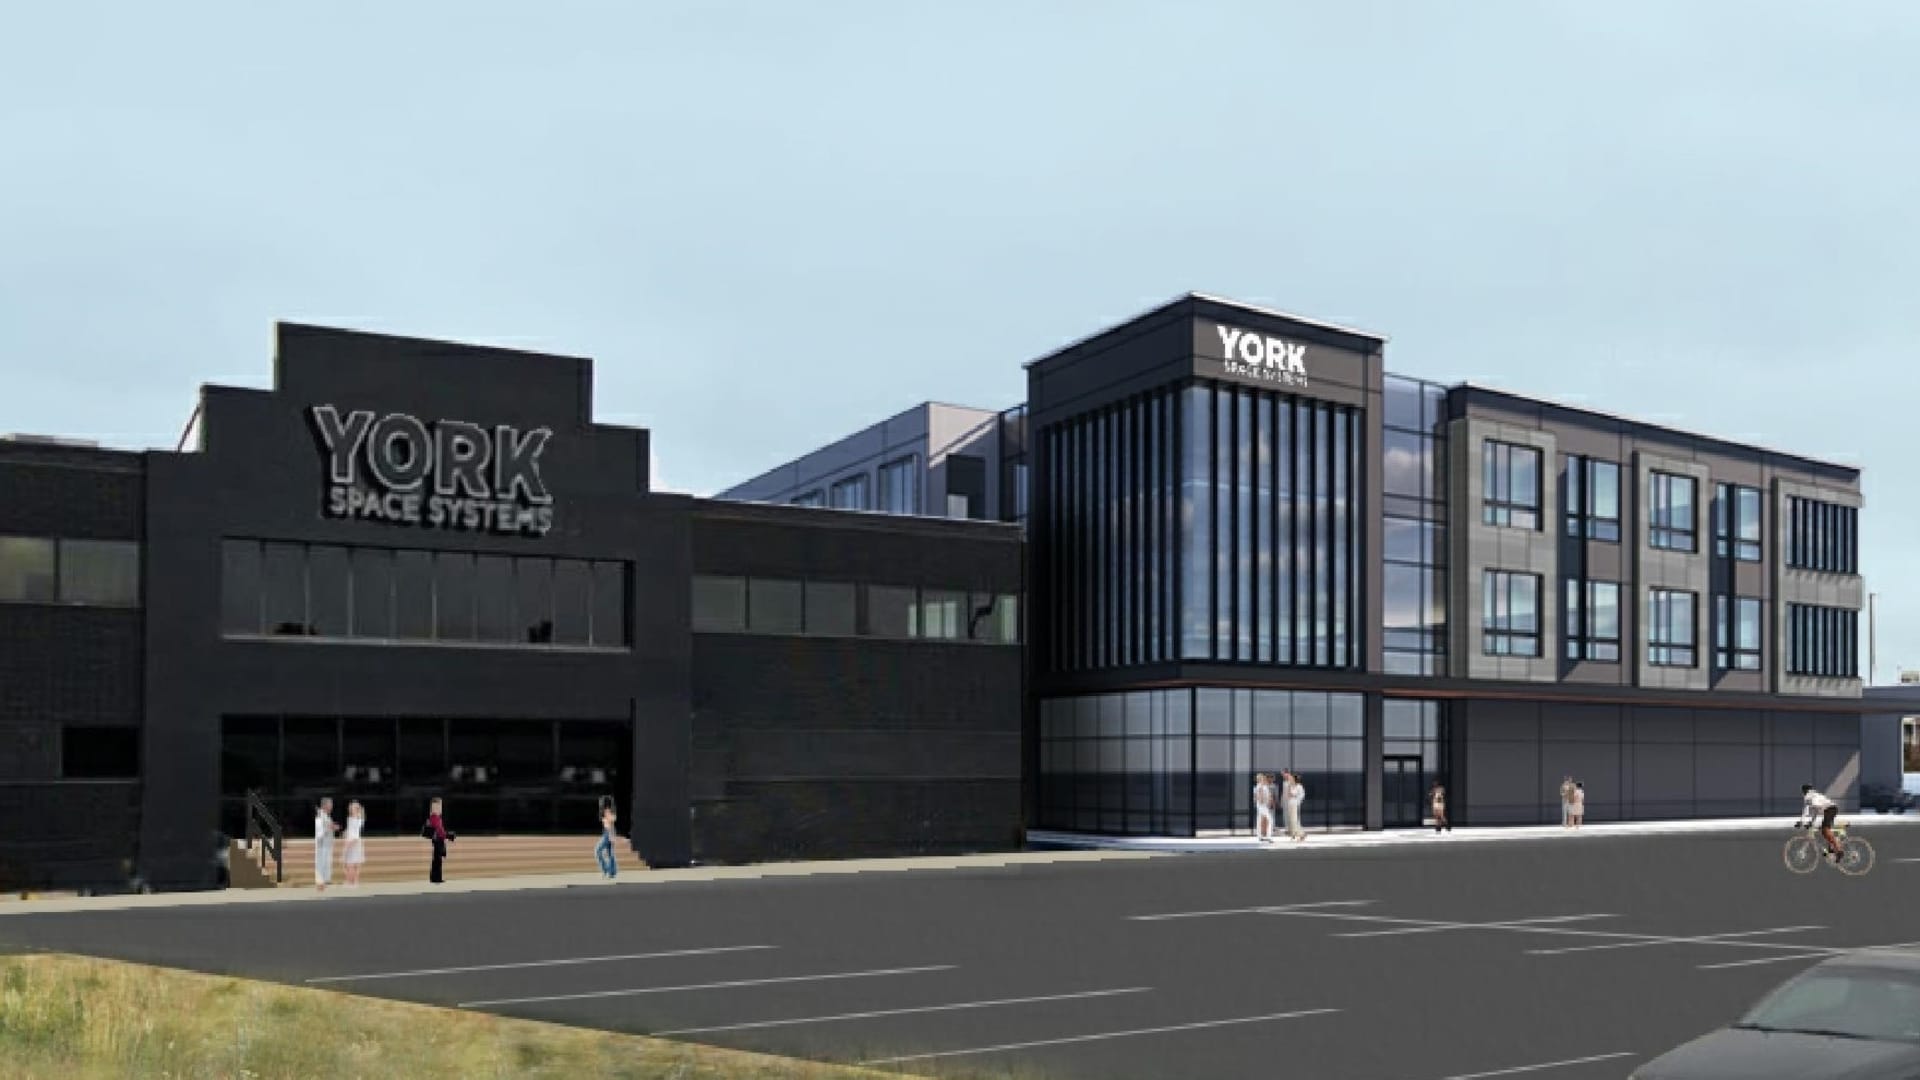 The company's existing building on the left, with a rendering of the planned expansion on the right.